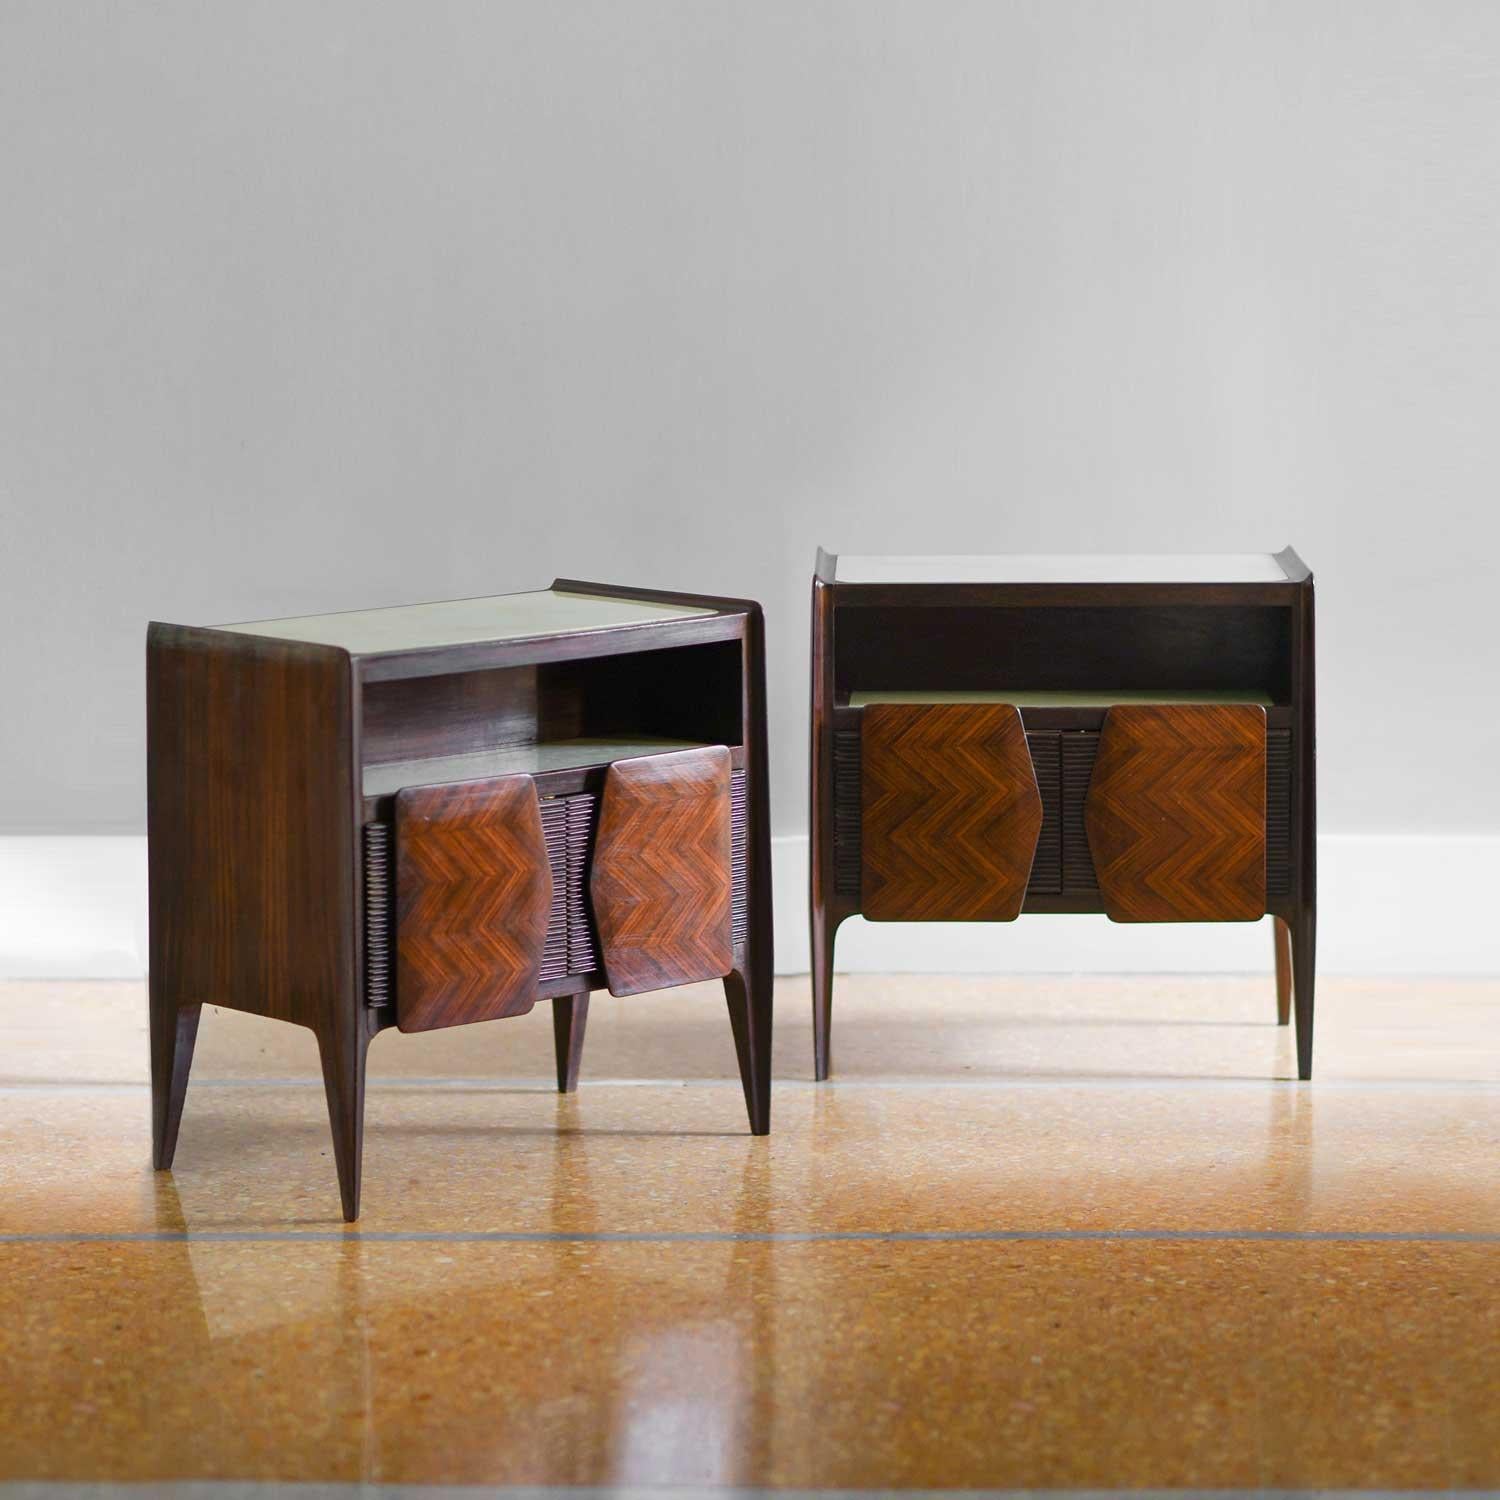 Pair of “La Permanente di Cantú” bedside tables in wood and grissinato wood with colored glass shelf. Italian production 1950.
PRODUCT DETAILS
Dimensions: 59w x 61h x 35d cm
Materials: wood, glass.
Production: Italian production 1950.